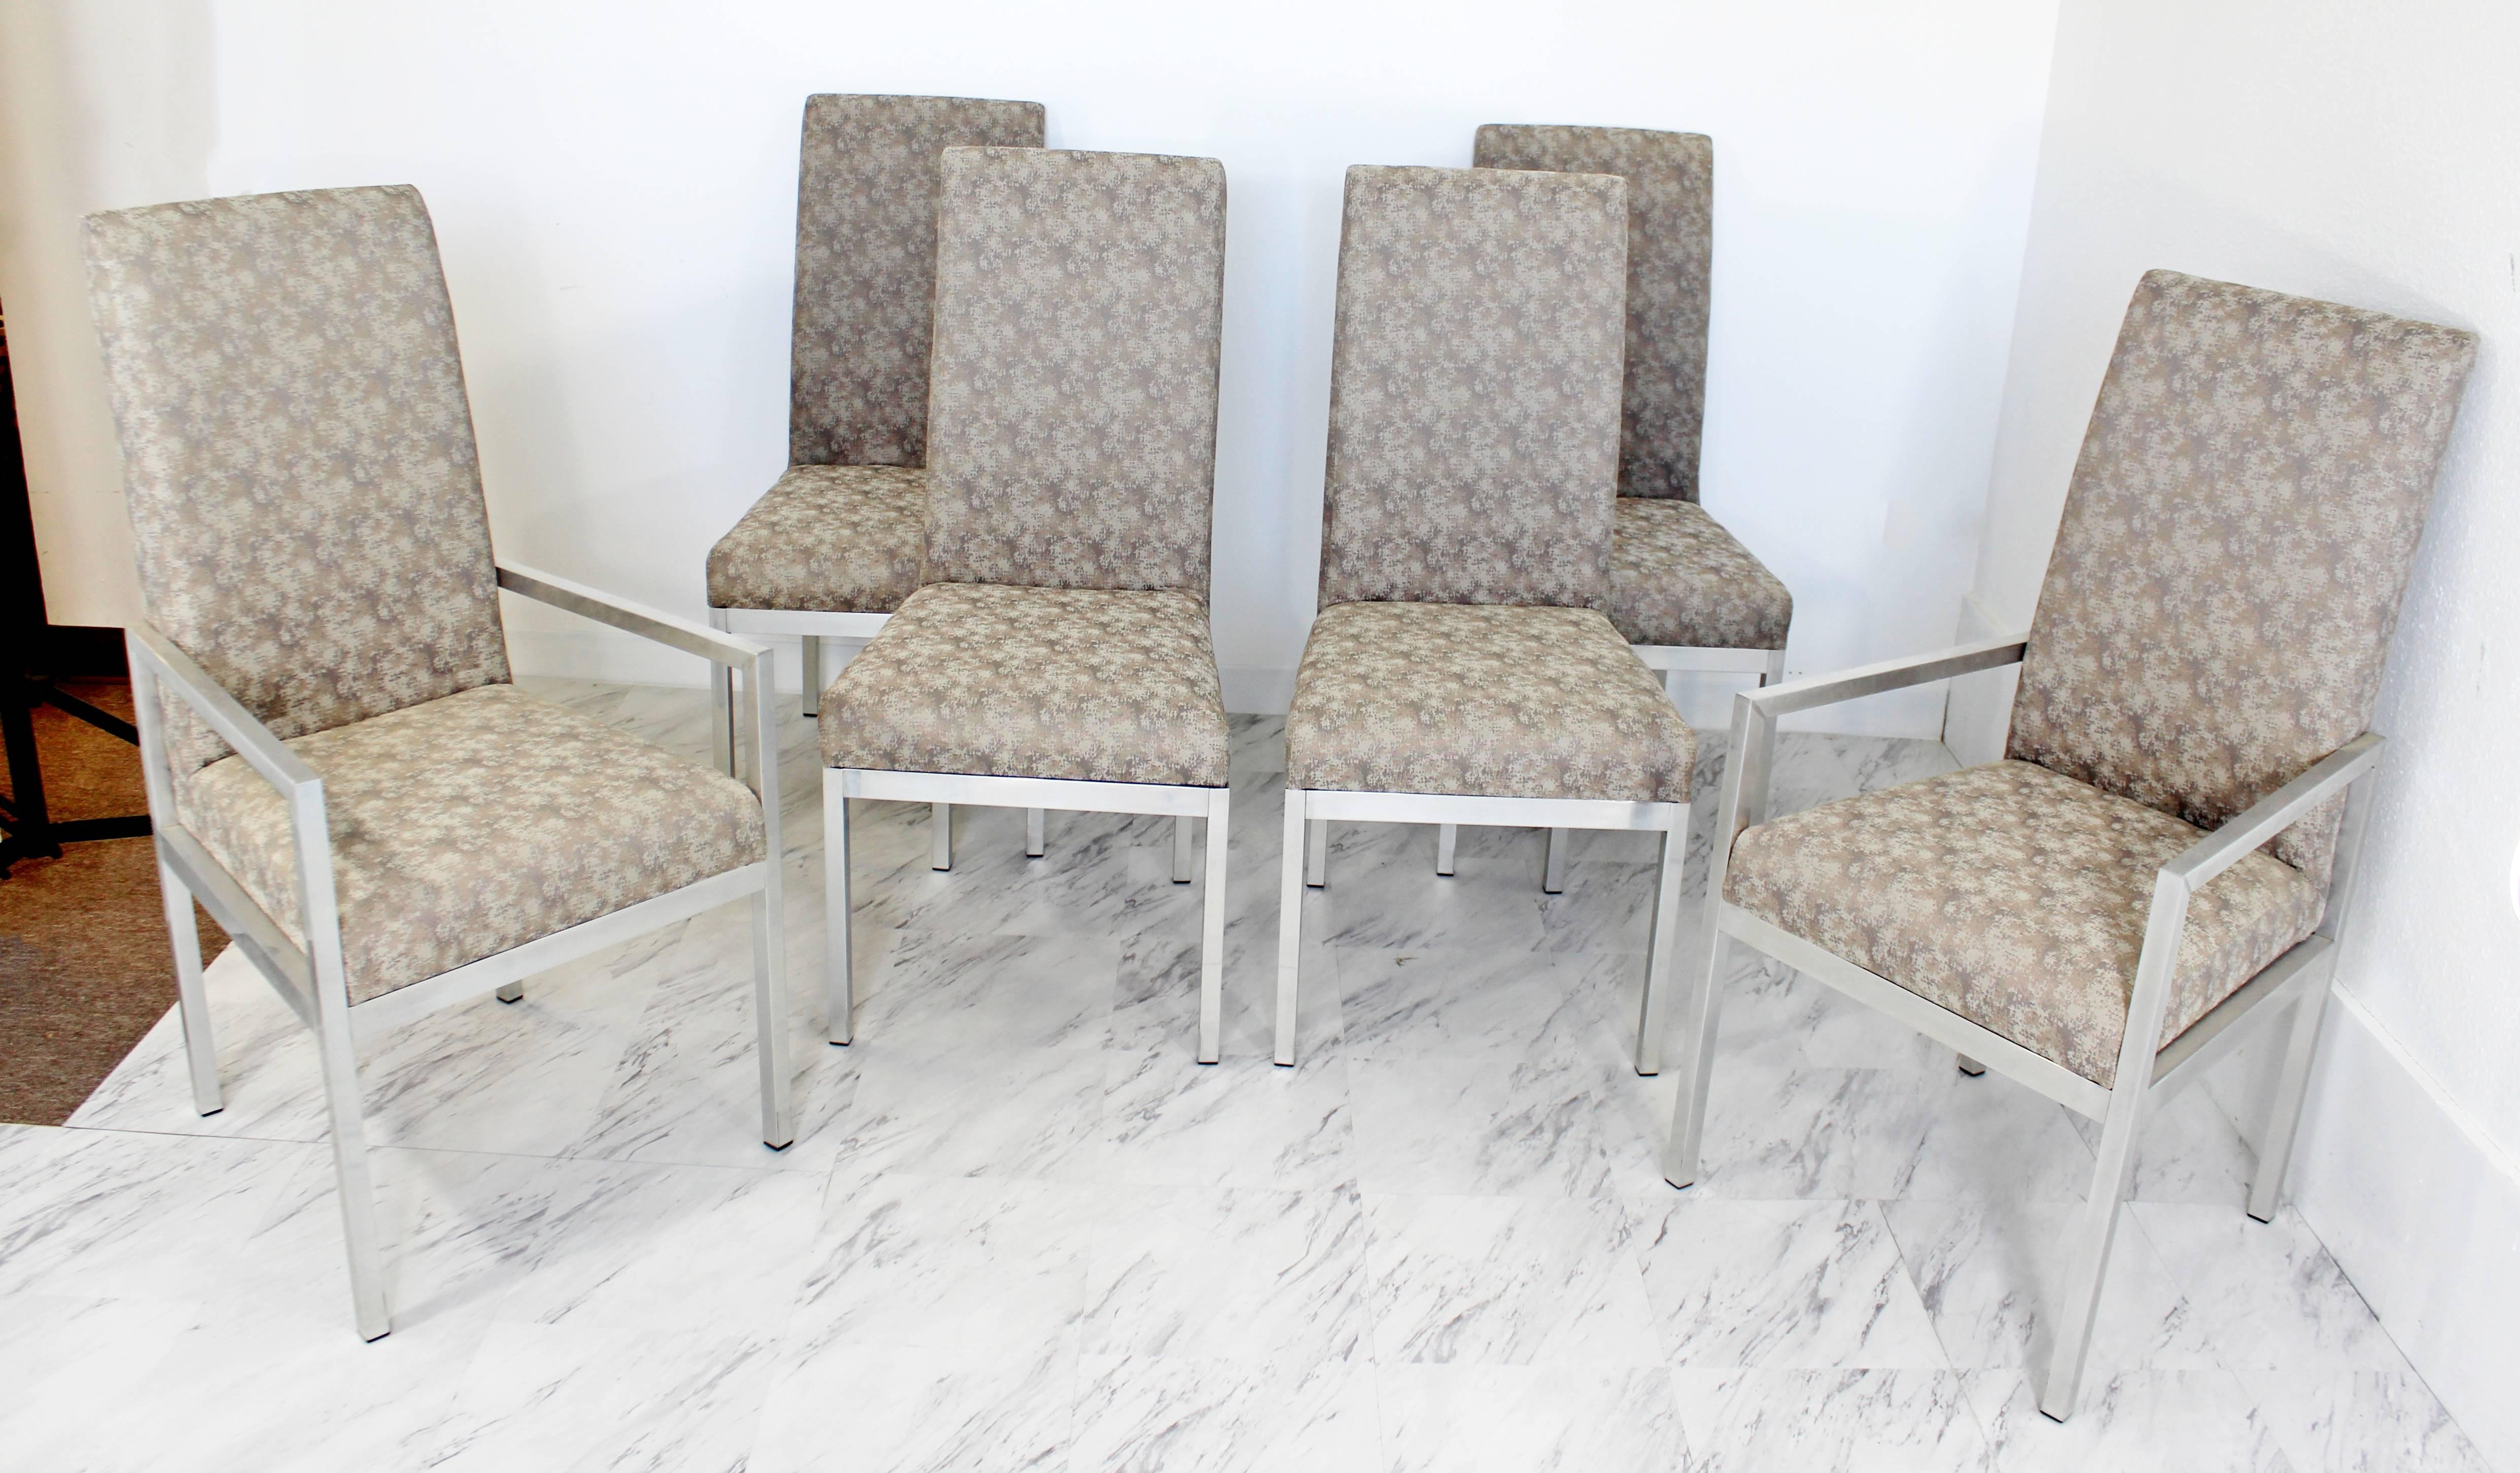 For your consideration is a stunning set of six aluminum base dining chairs. Two armchairs and four side chairs. Attributed to Milo Baughman for DIA. In excellent condition. The dimensions are 20"/21.5" W x 22" D x 41.5" H x